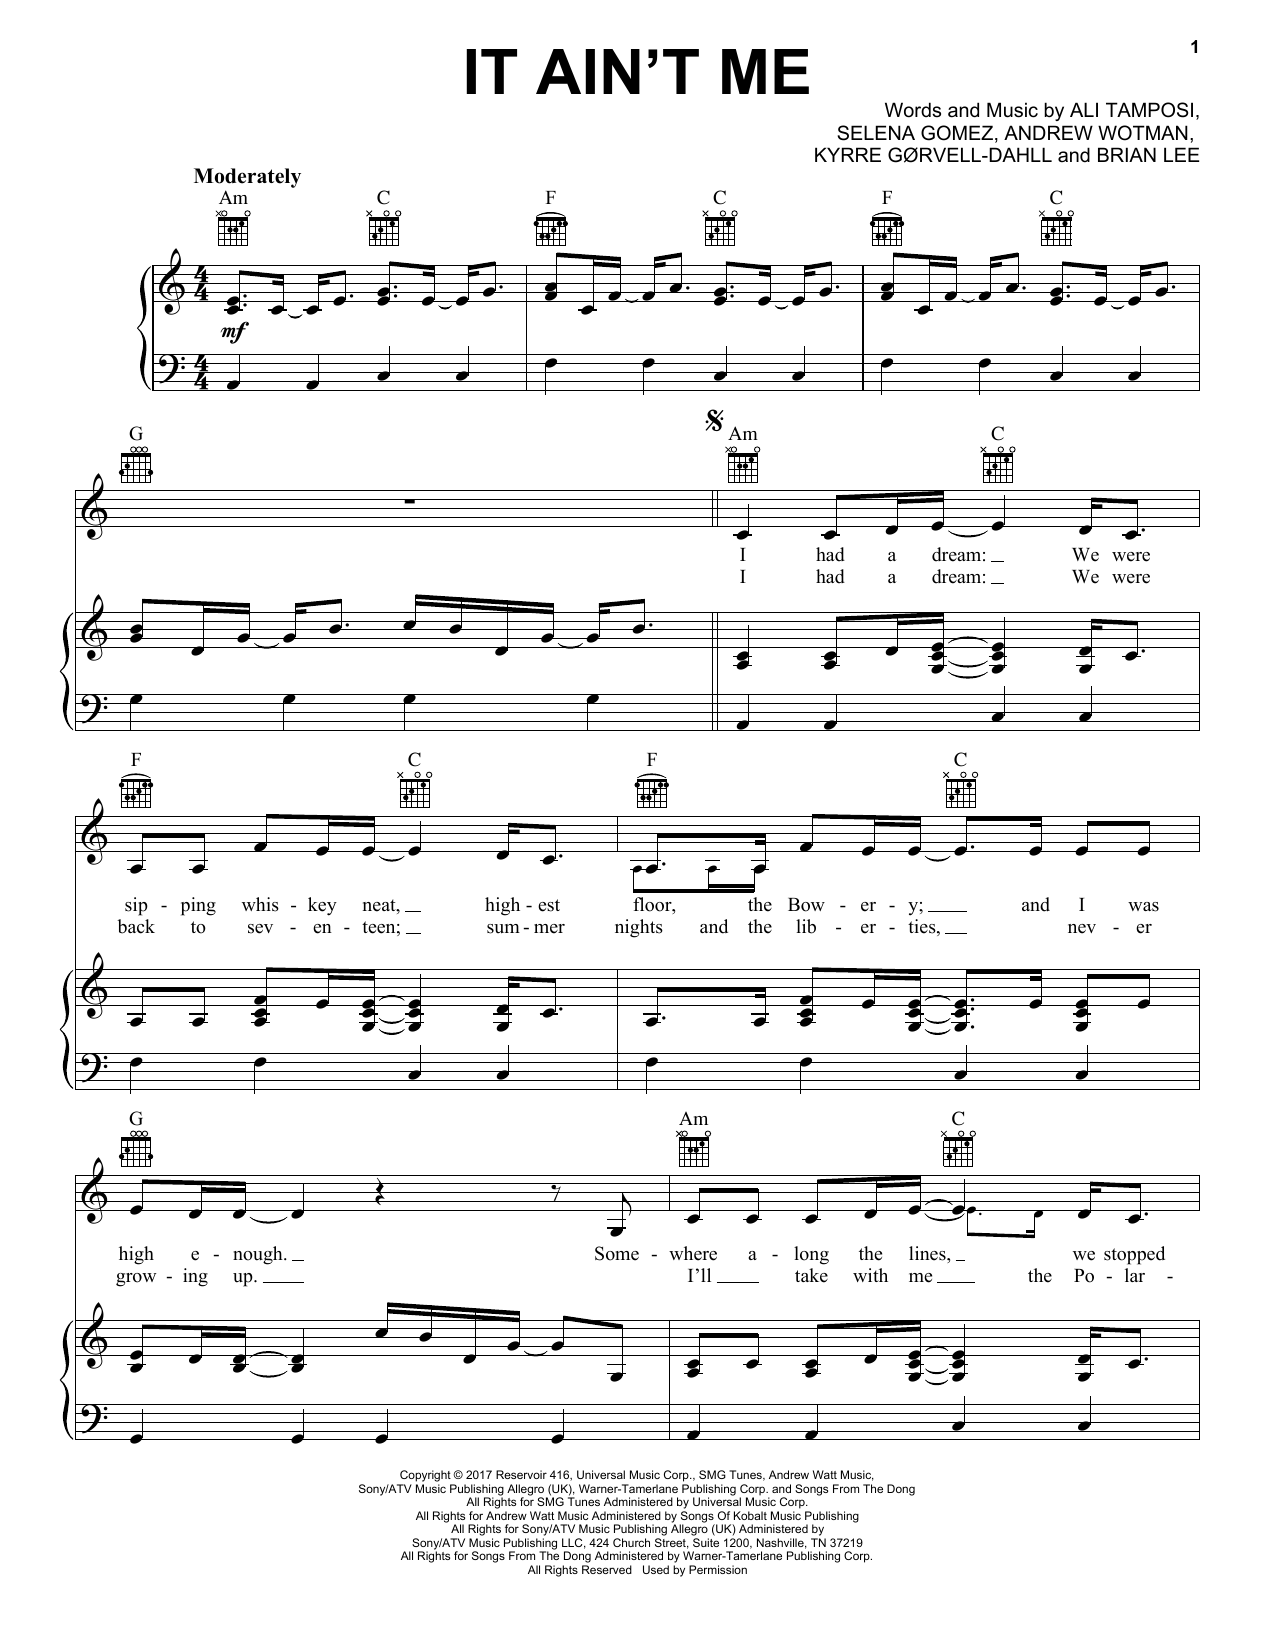 Download Kygo and Selena Gomez It Ain't Me Sheet Music